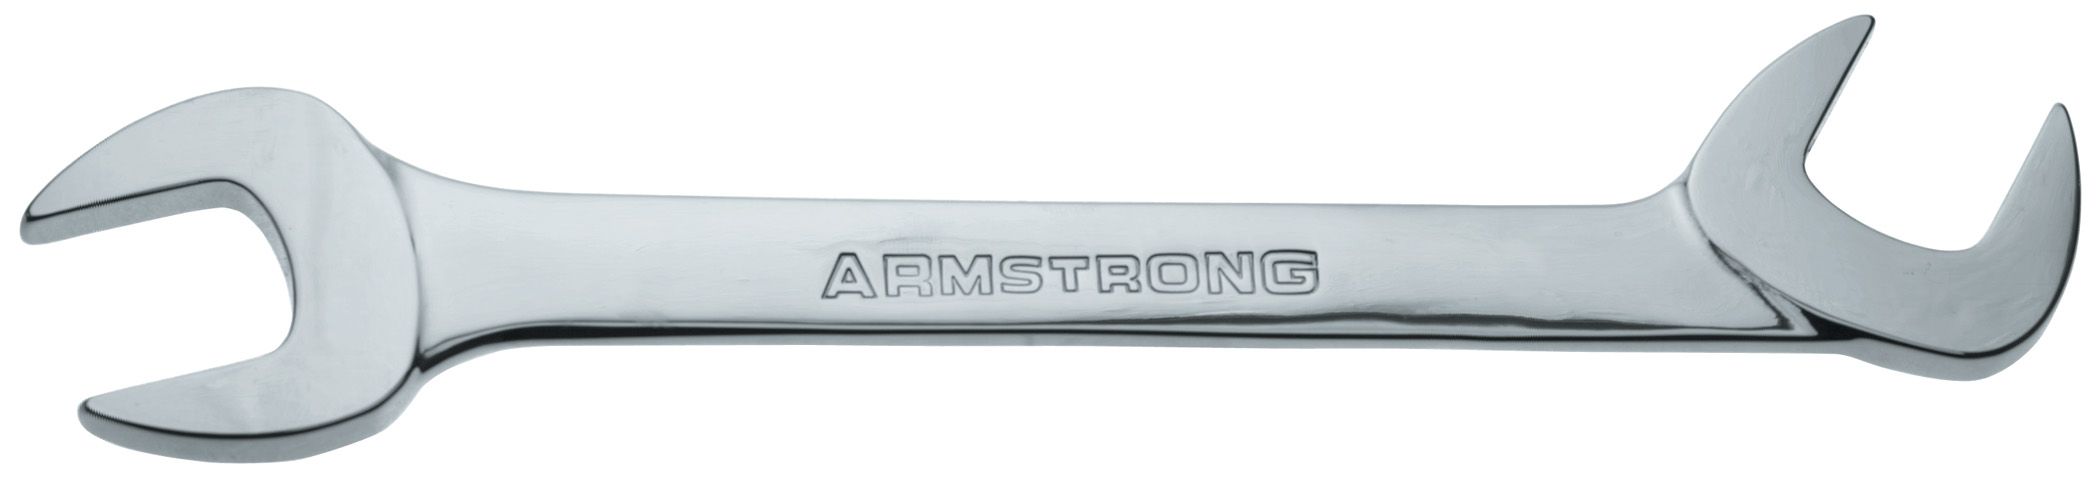 Armstrong 1-7/16 in. Satin Finish 15&deg; and 60&deg; Open End Angle Wrench